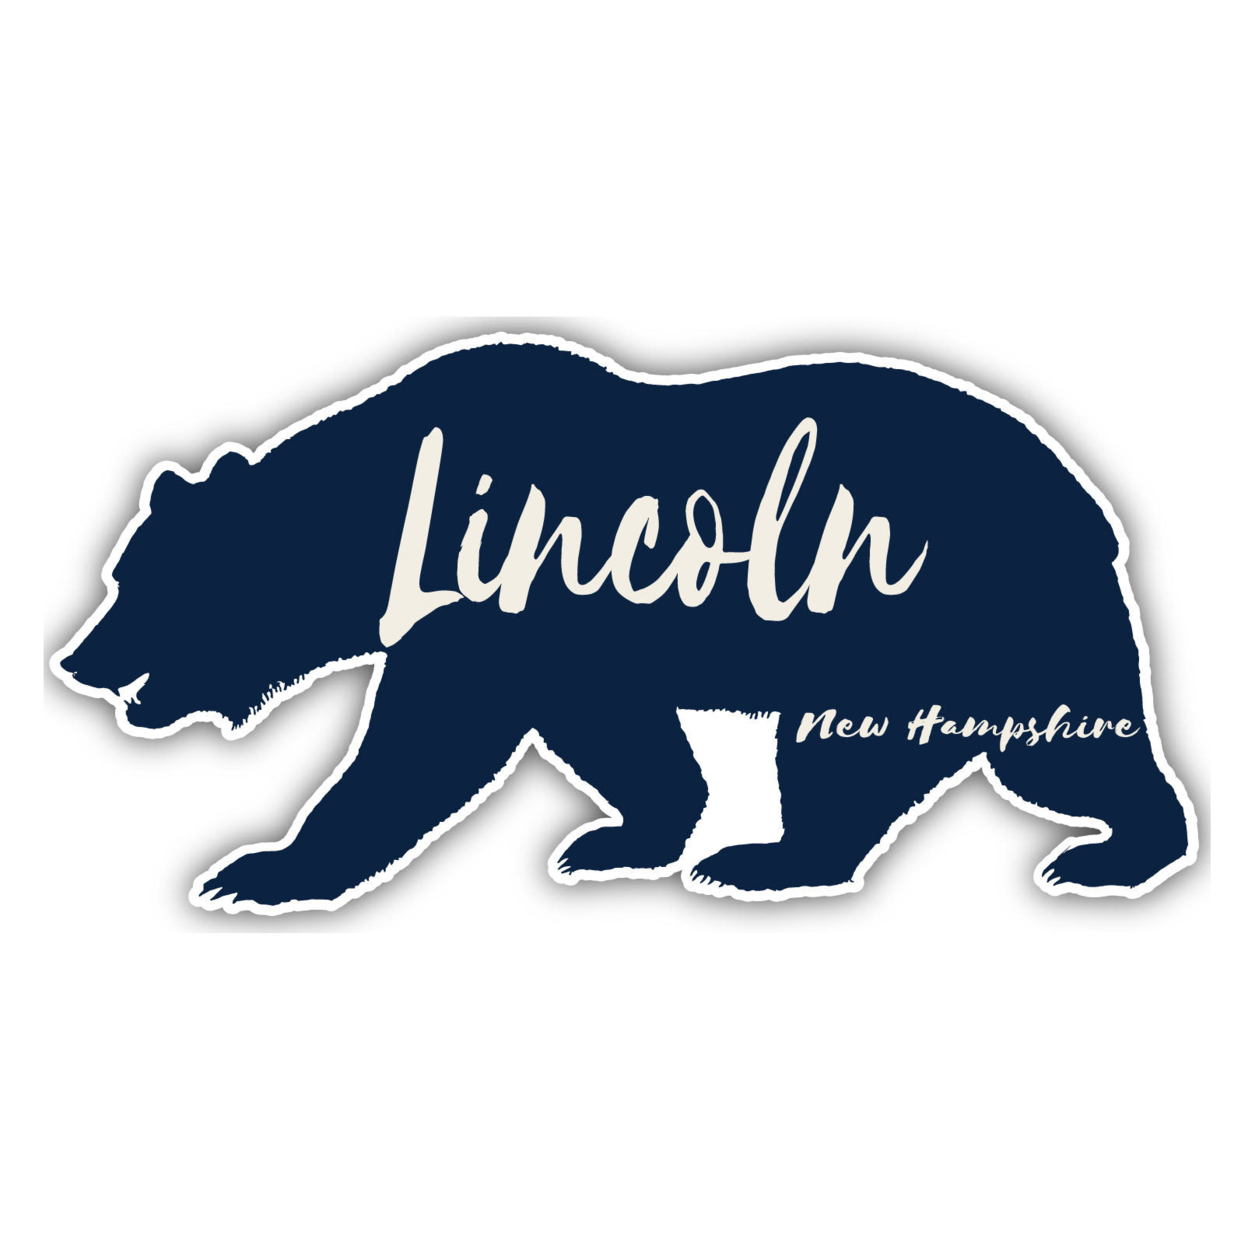 Lincoln New Hampshire Souvenir Decorative Stickers (Choose Theme And Size) - 4-Inch, Adventures Awaits